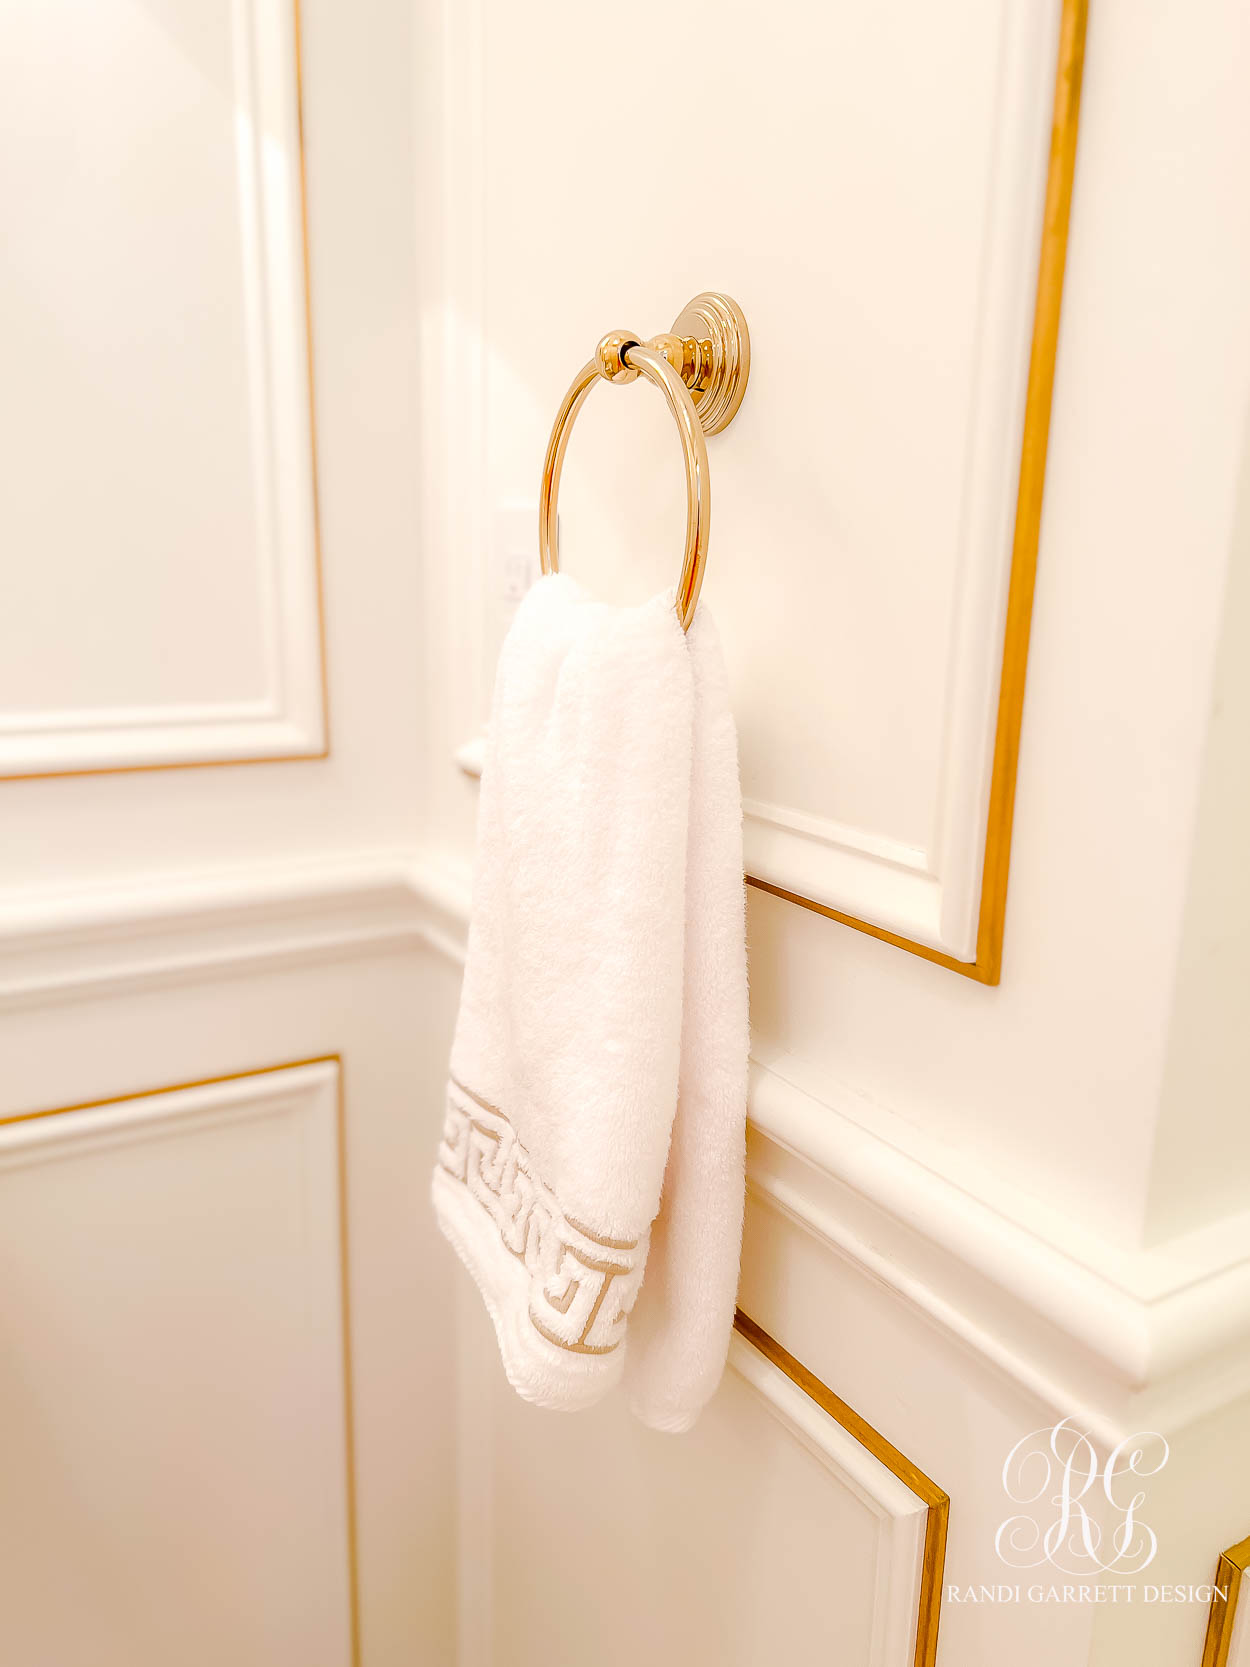 Greek Key embroidered hand towels